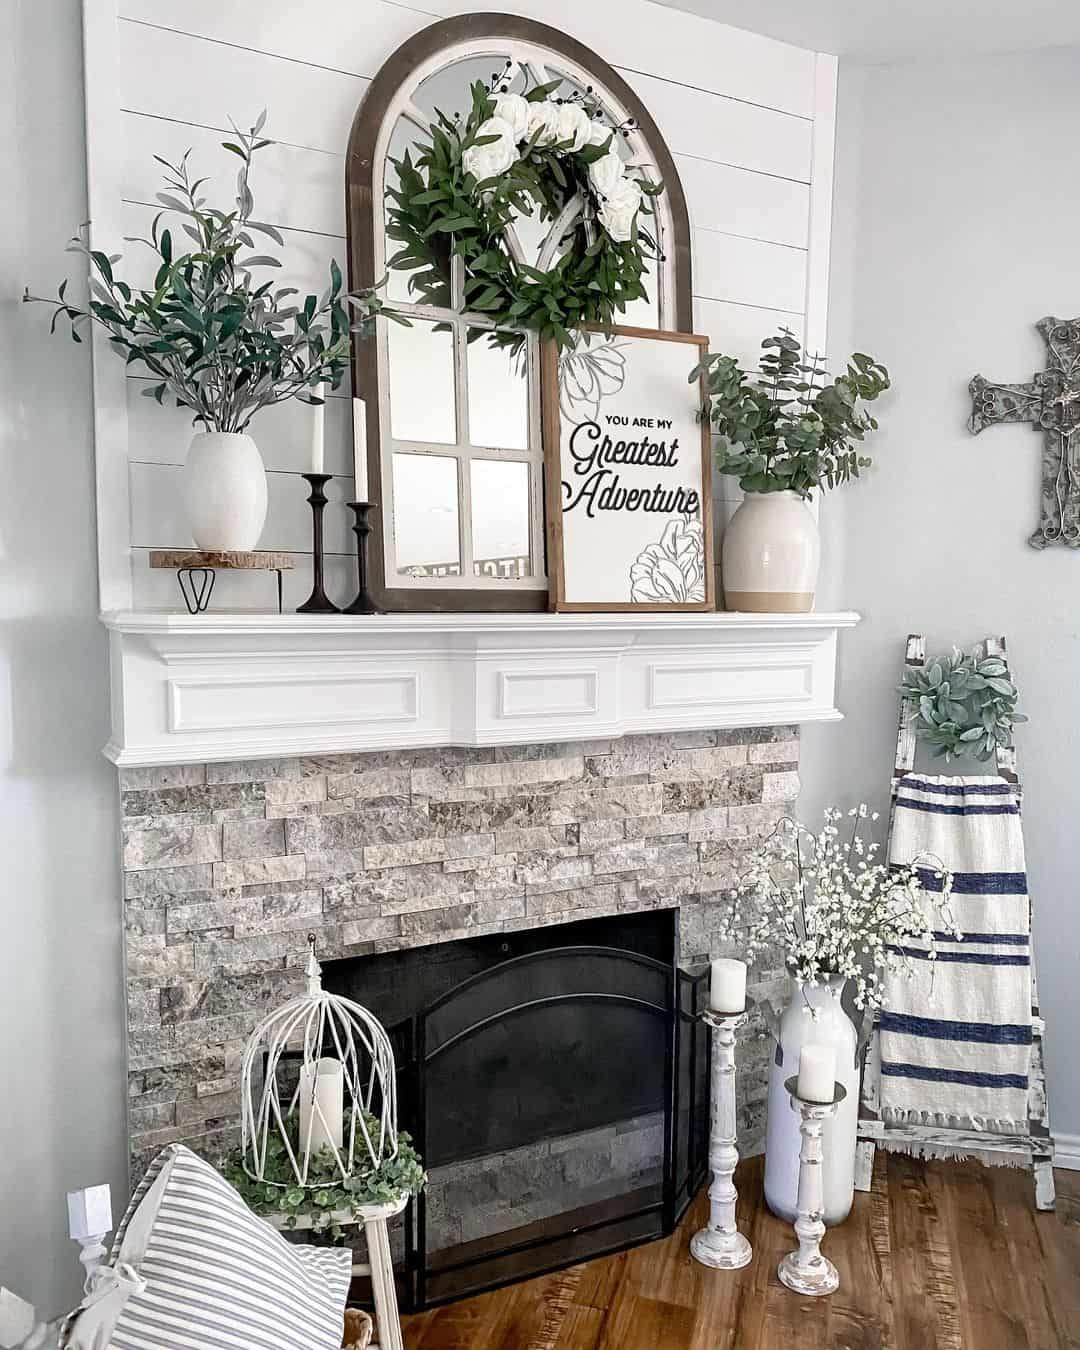 Ideas For Above The Fireplace, Farmhouse Decor For Fireplace